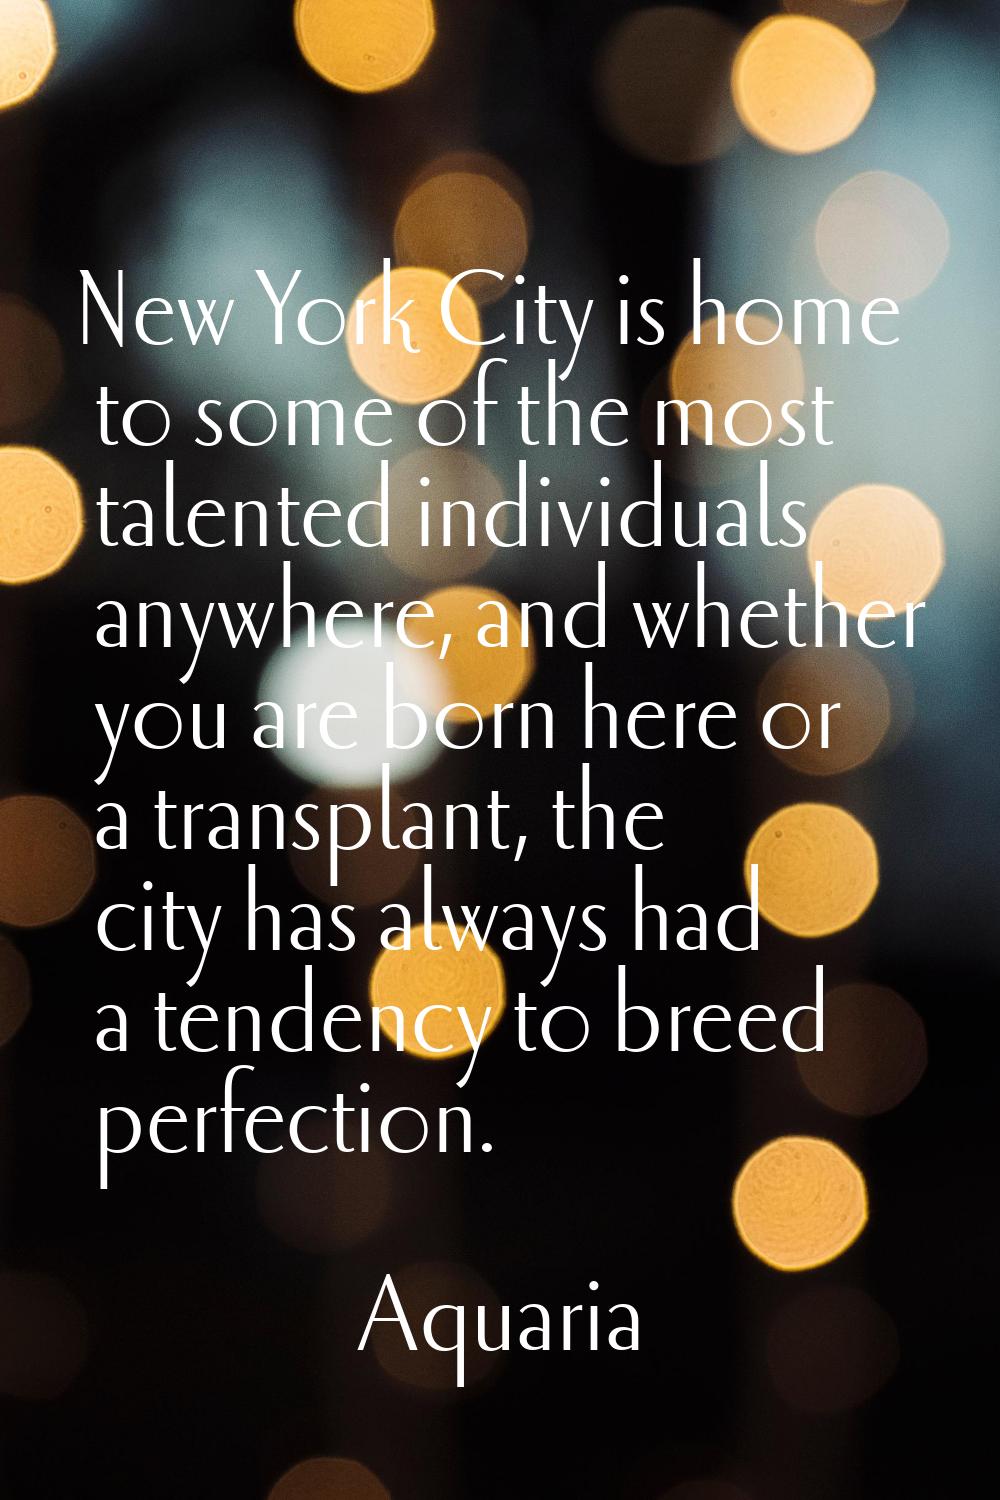 New York City is home to some of the most talented individuals anywhere, and whether you are born h